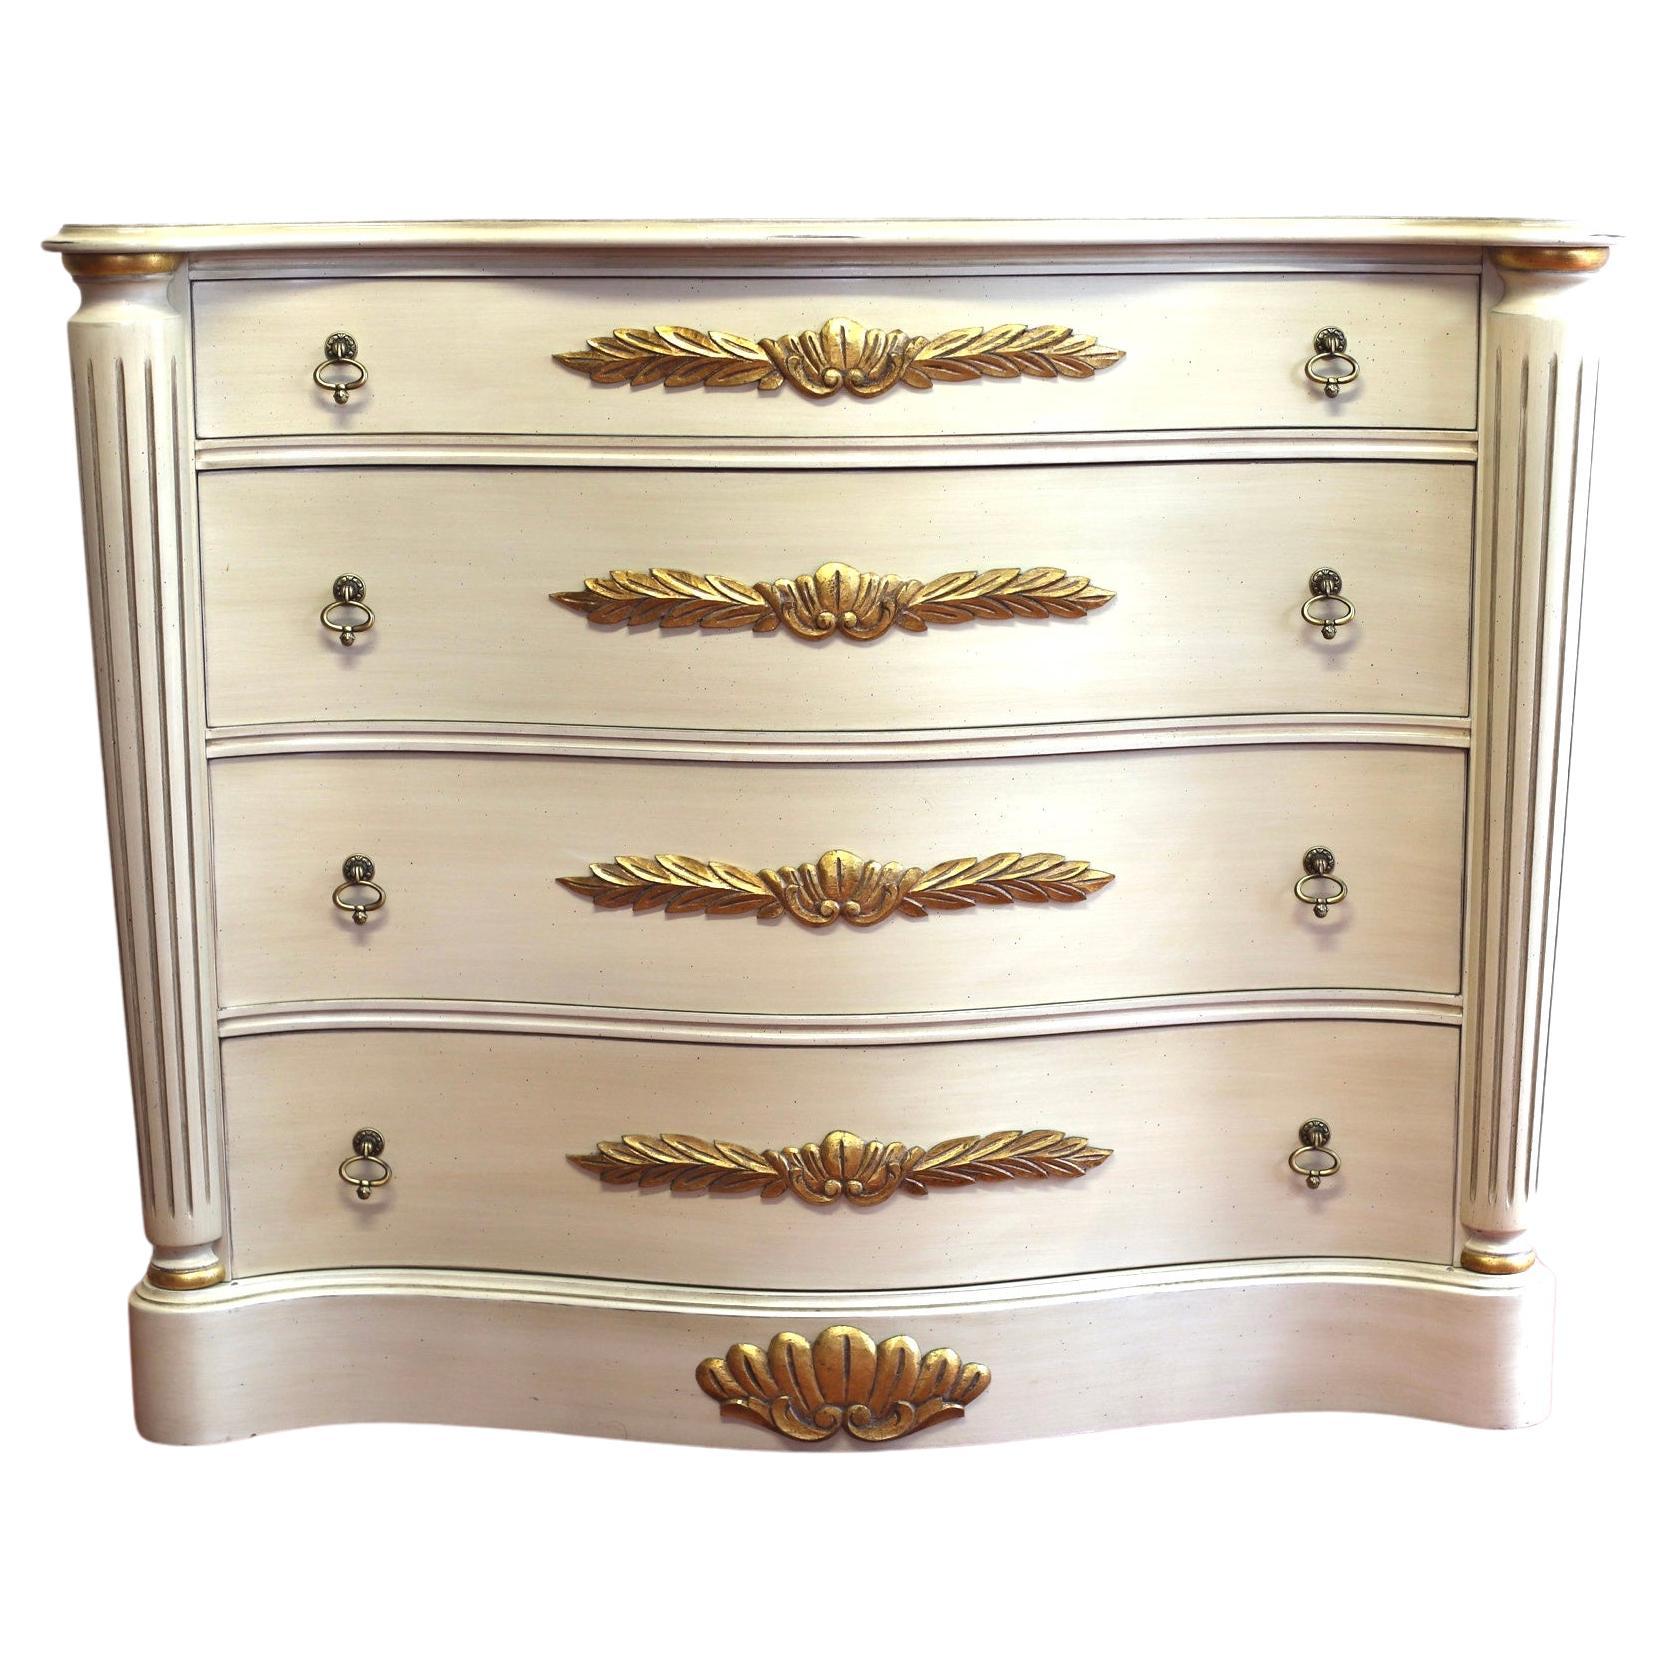 Lovelly Painted Chest Of 4 Drawers French Provincial Style 